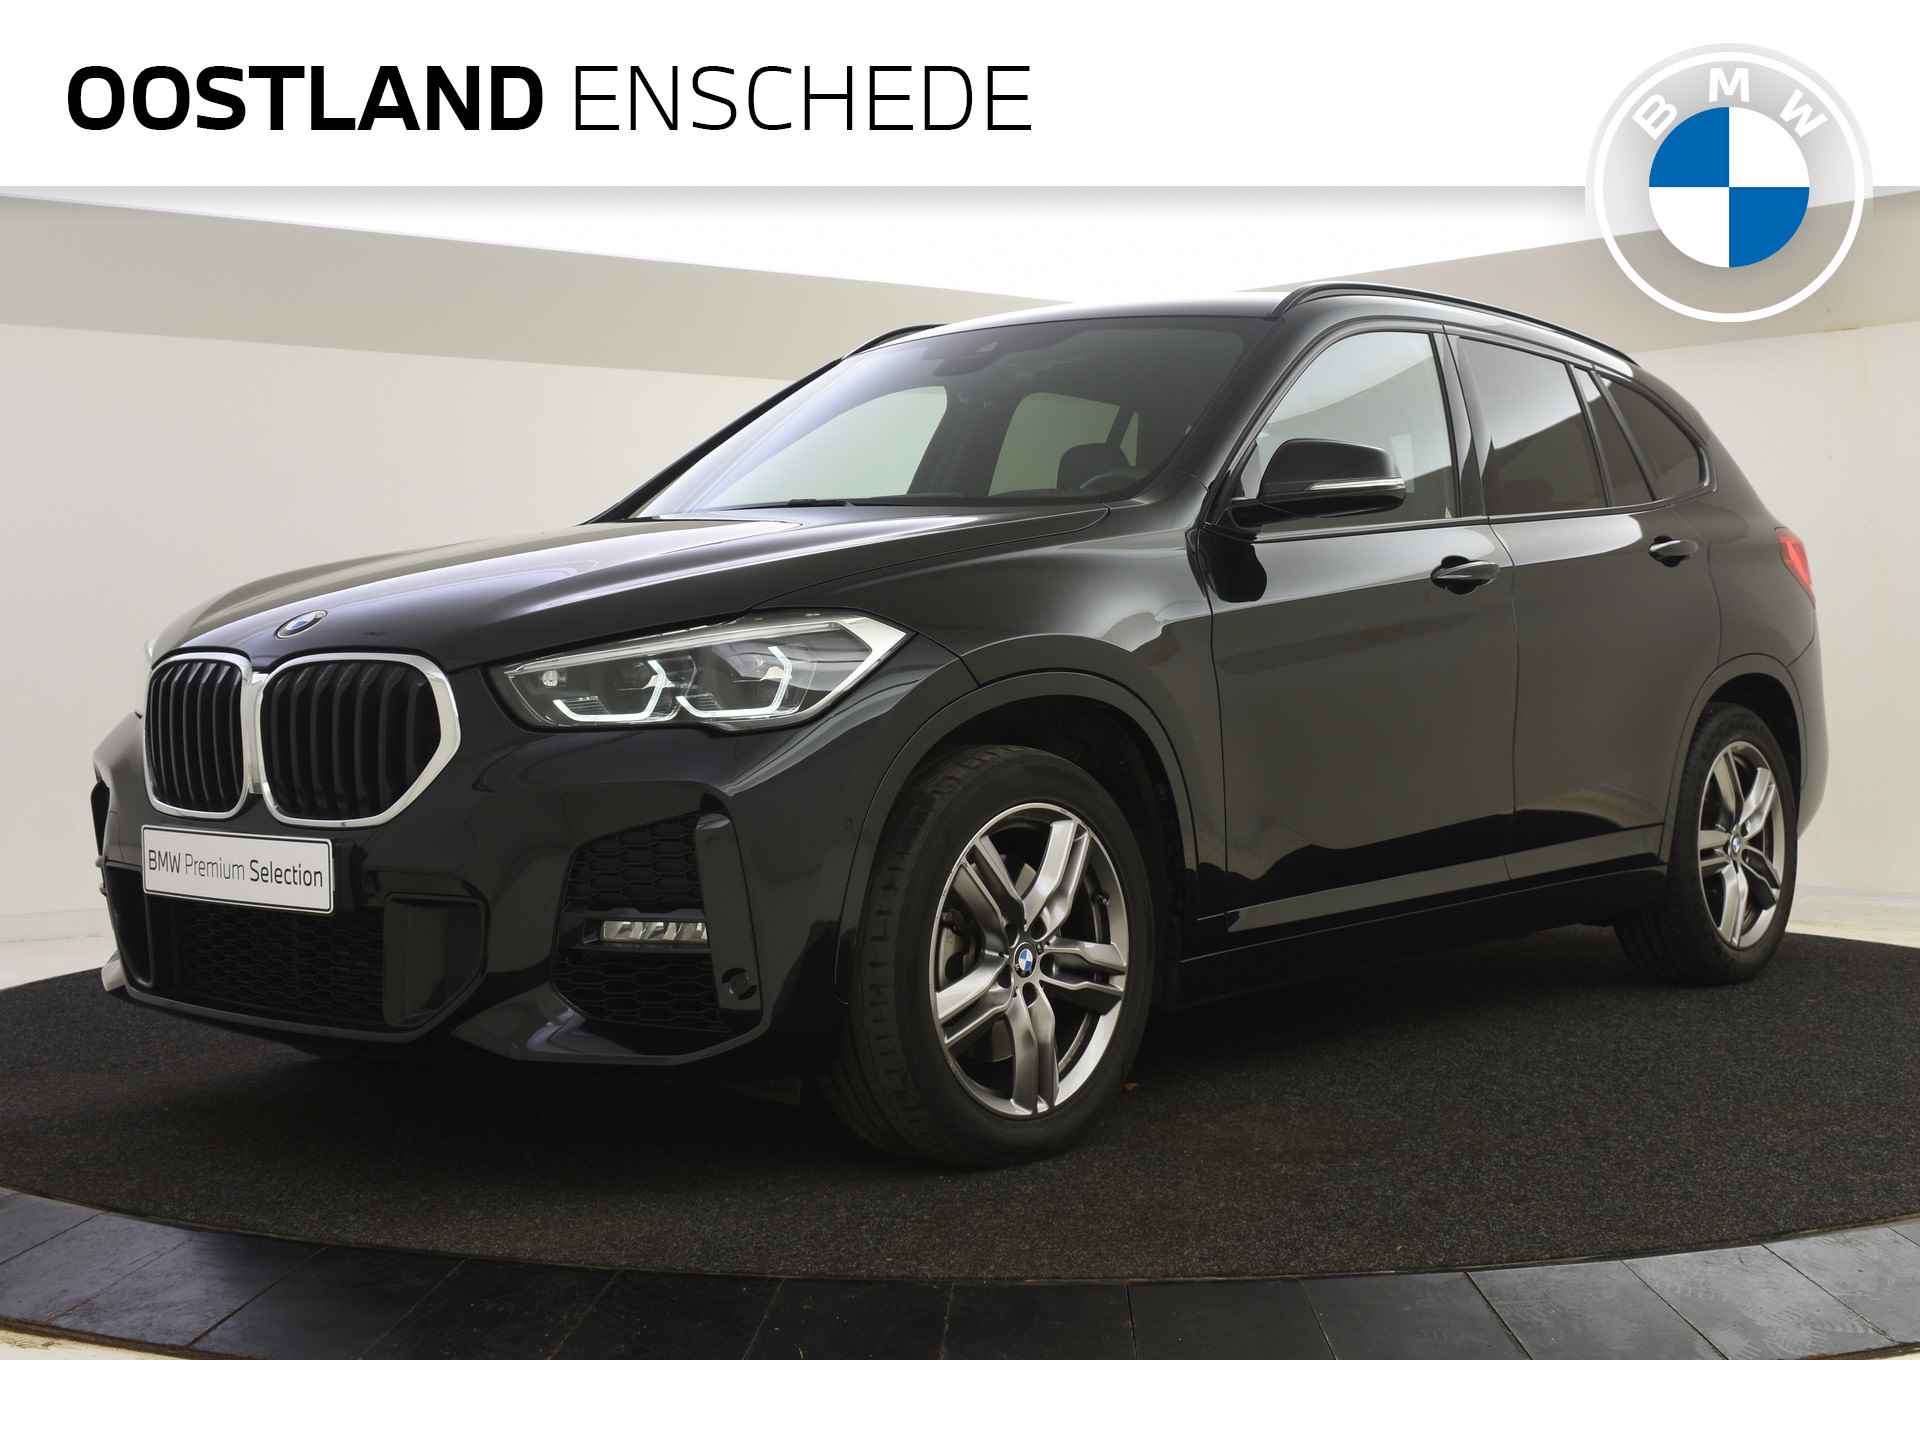 BMW X1 sDrive20i Executive M Sport Automaat / Sportstoelen / Adaptieve LED / Active Cruise Control / Achteruitrijcamera / Head-Up / Park Assistant / Driving Assistant Plus - 1/47